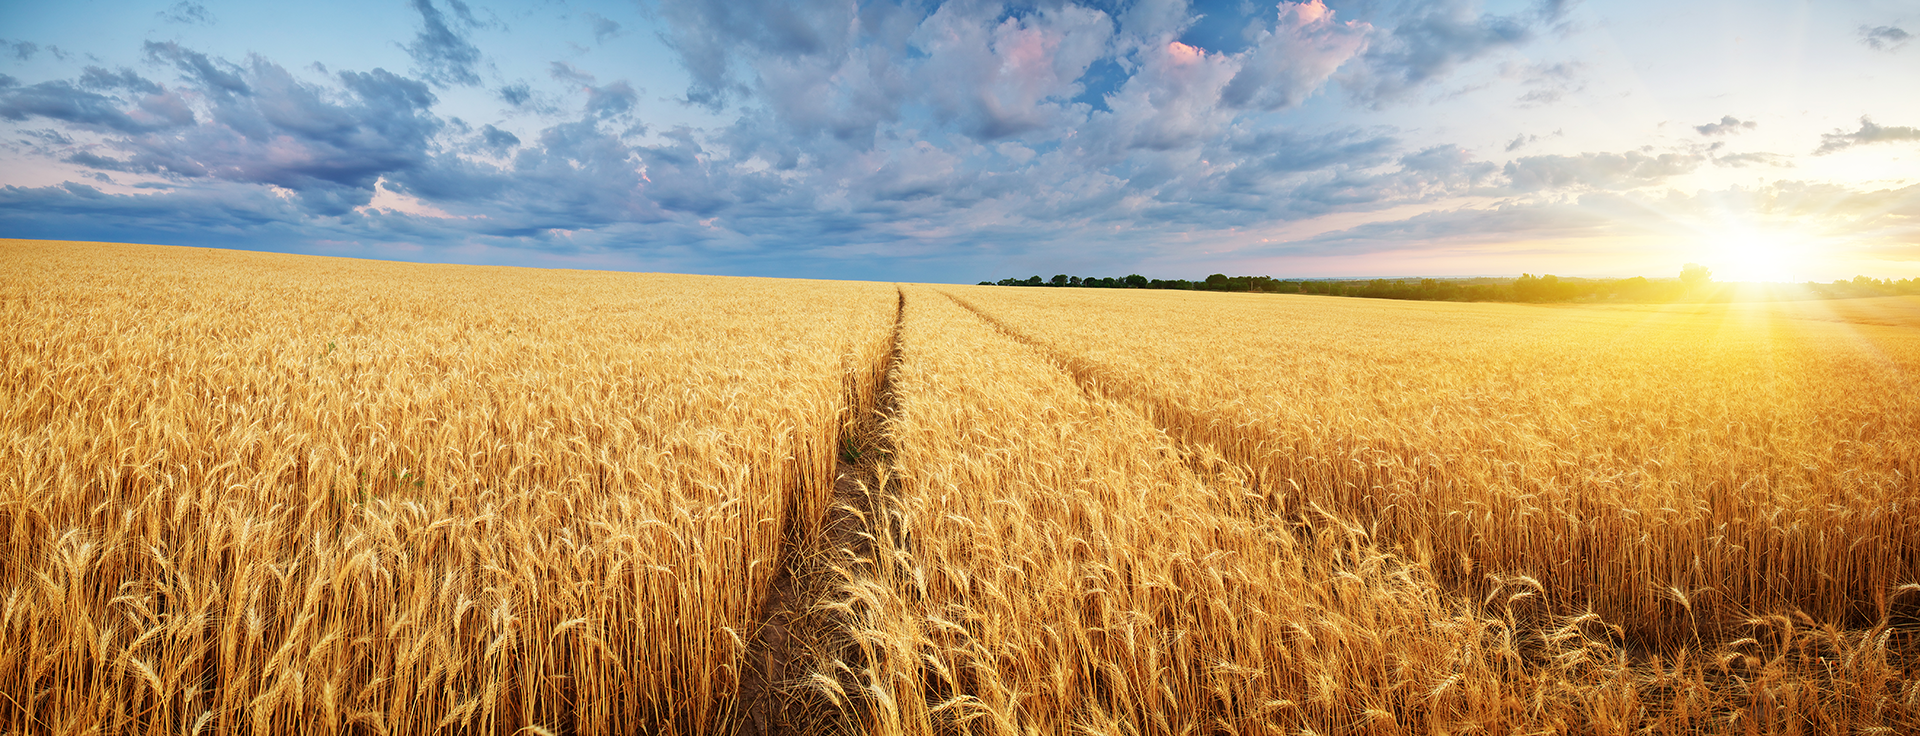 wheat field with a cloudy blue sky during sunset